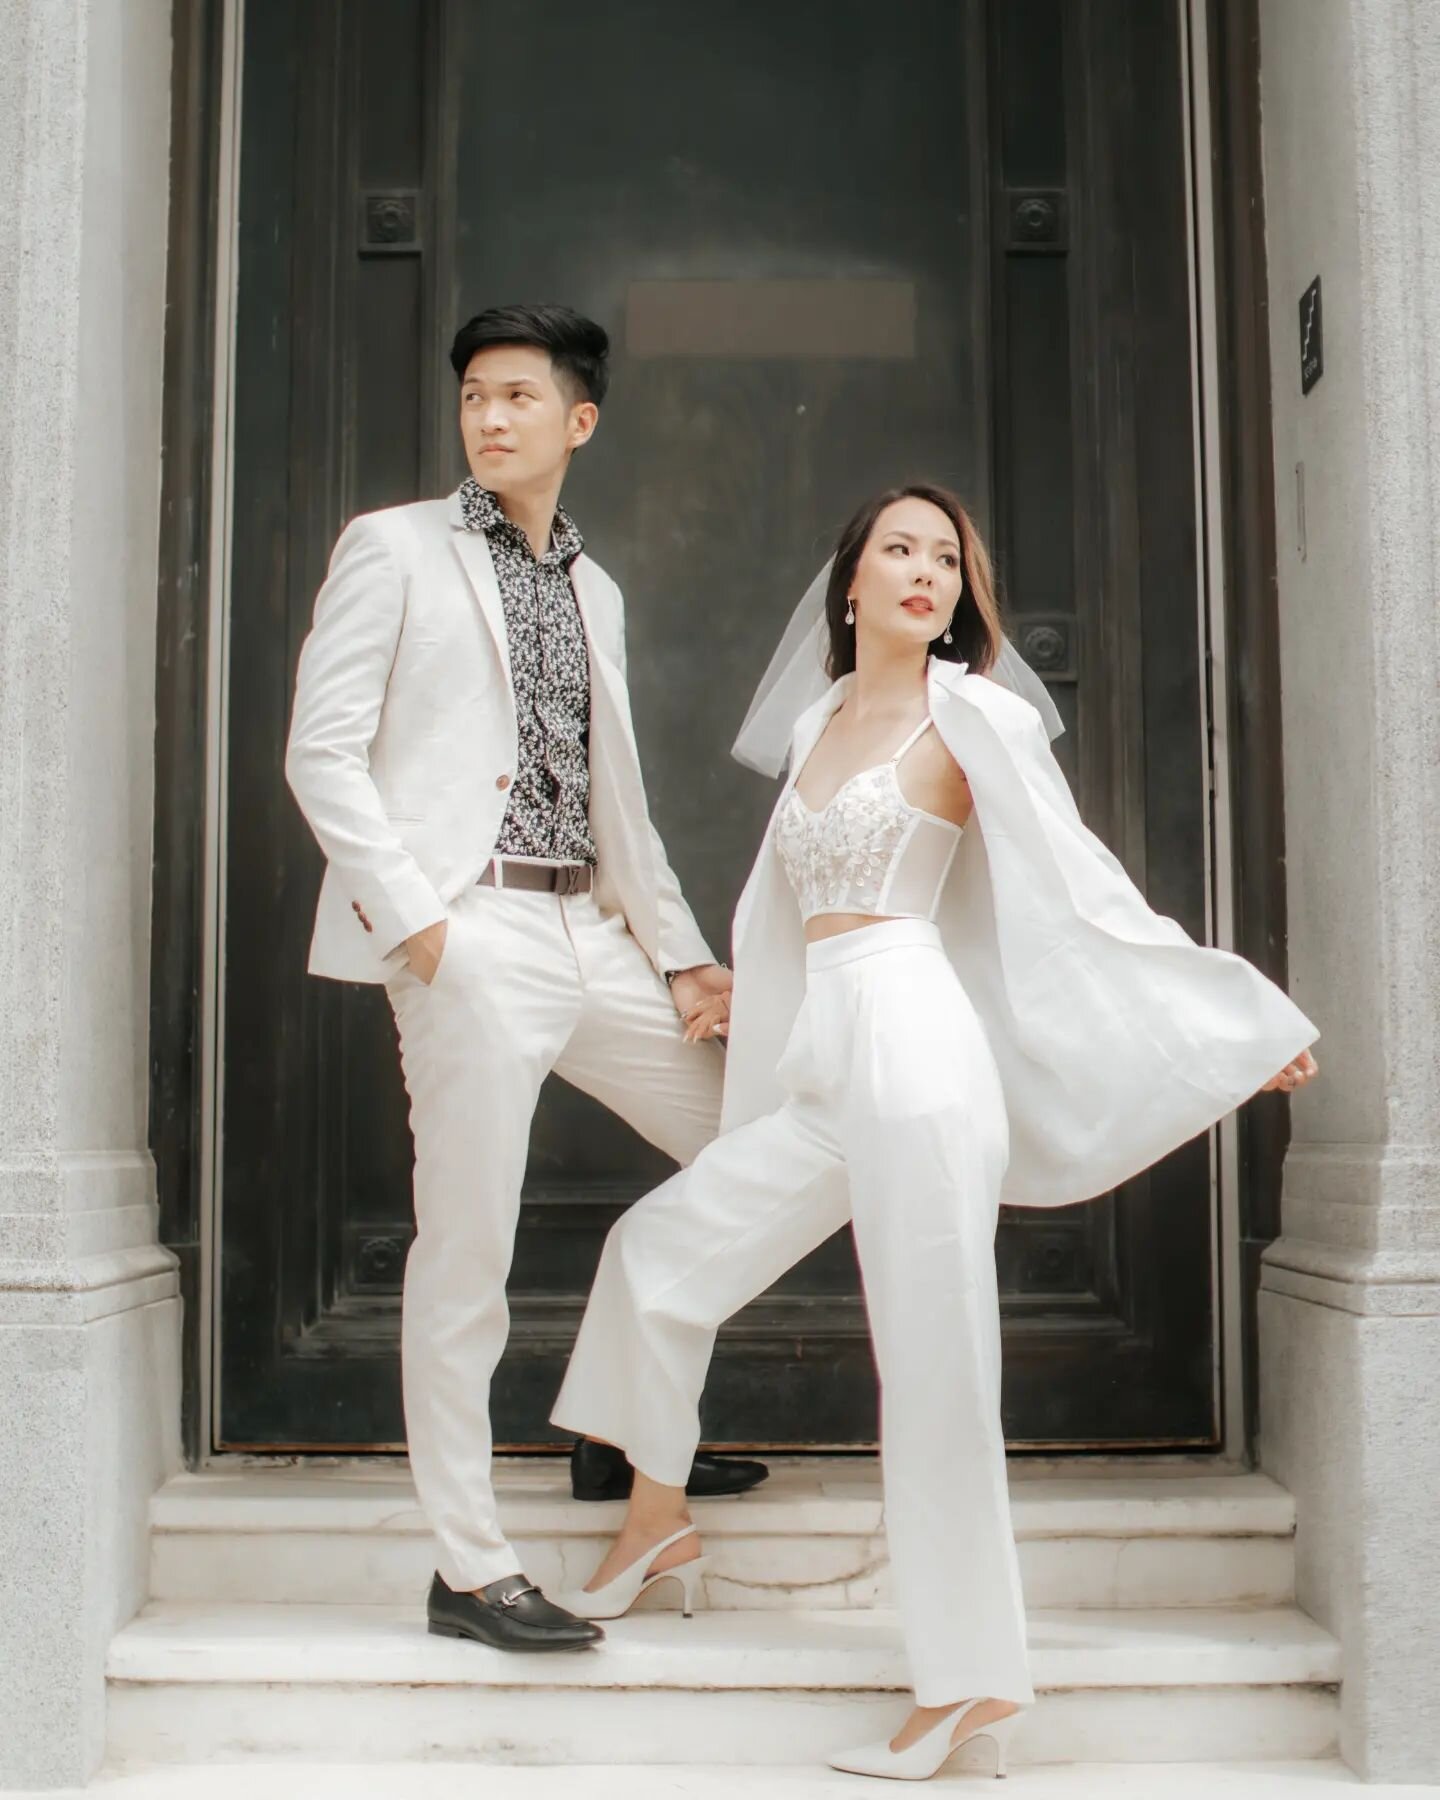 K + G | Love can be in the form of colours. In this case, Love is Ivory White and Red.
&bull;
&bull;
&bull;
&bull;
&bull;
#theweddingscoop #igsg #prewedding #bridestory #sgbrides #beloved #belovedcollective #cmomentdesign #theknot #love #bridelopepro